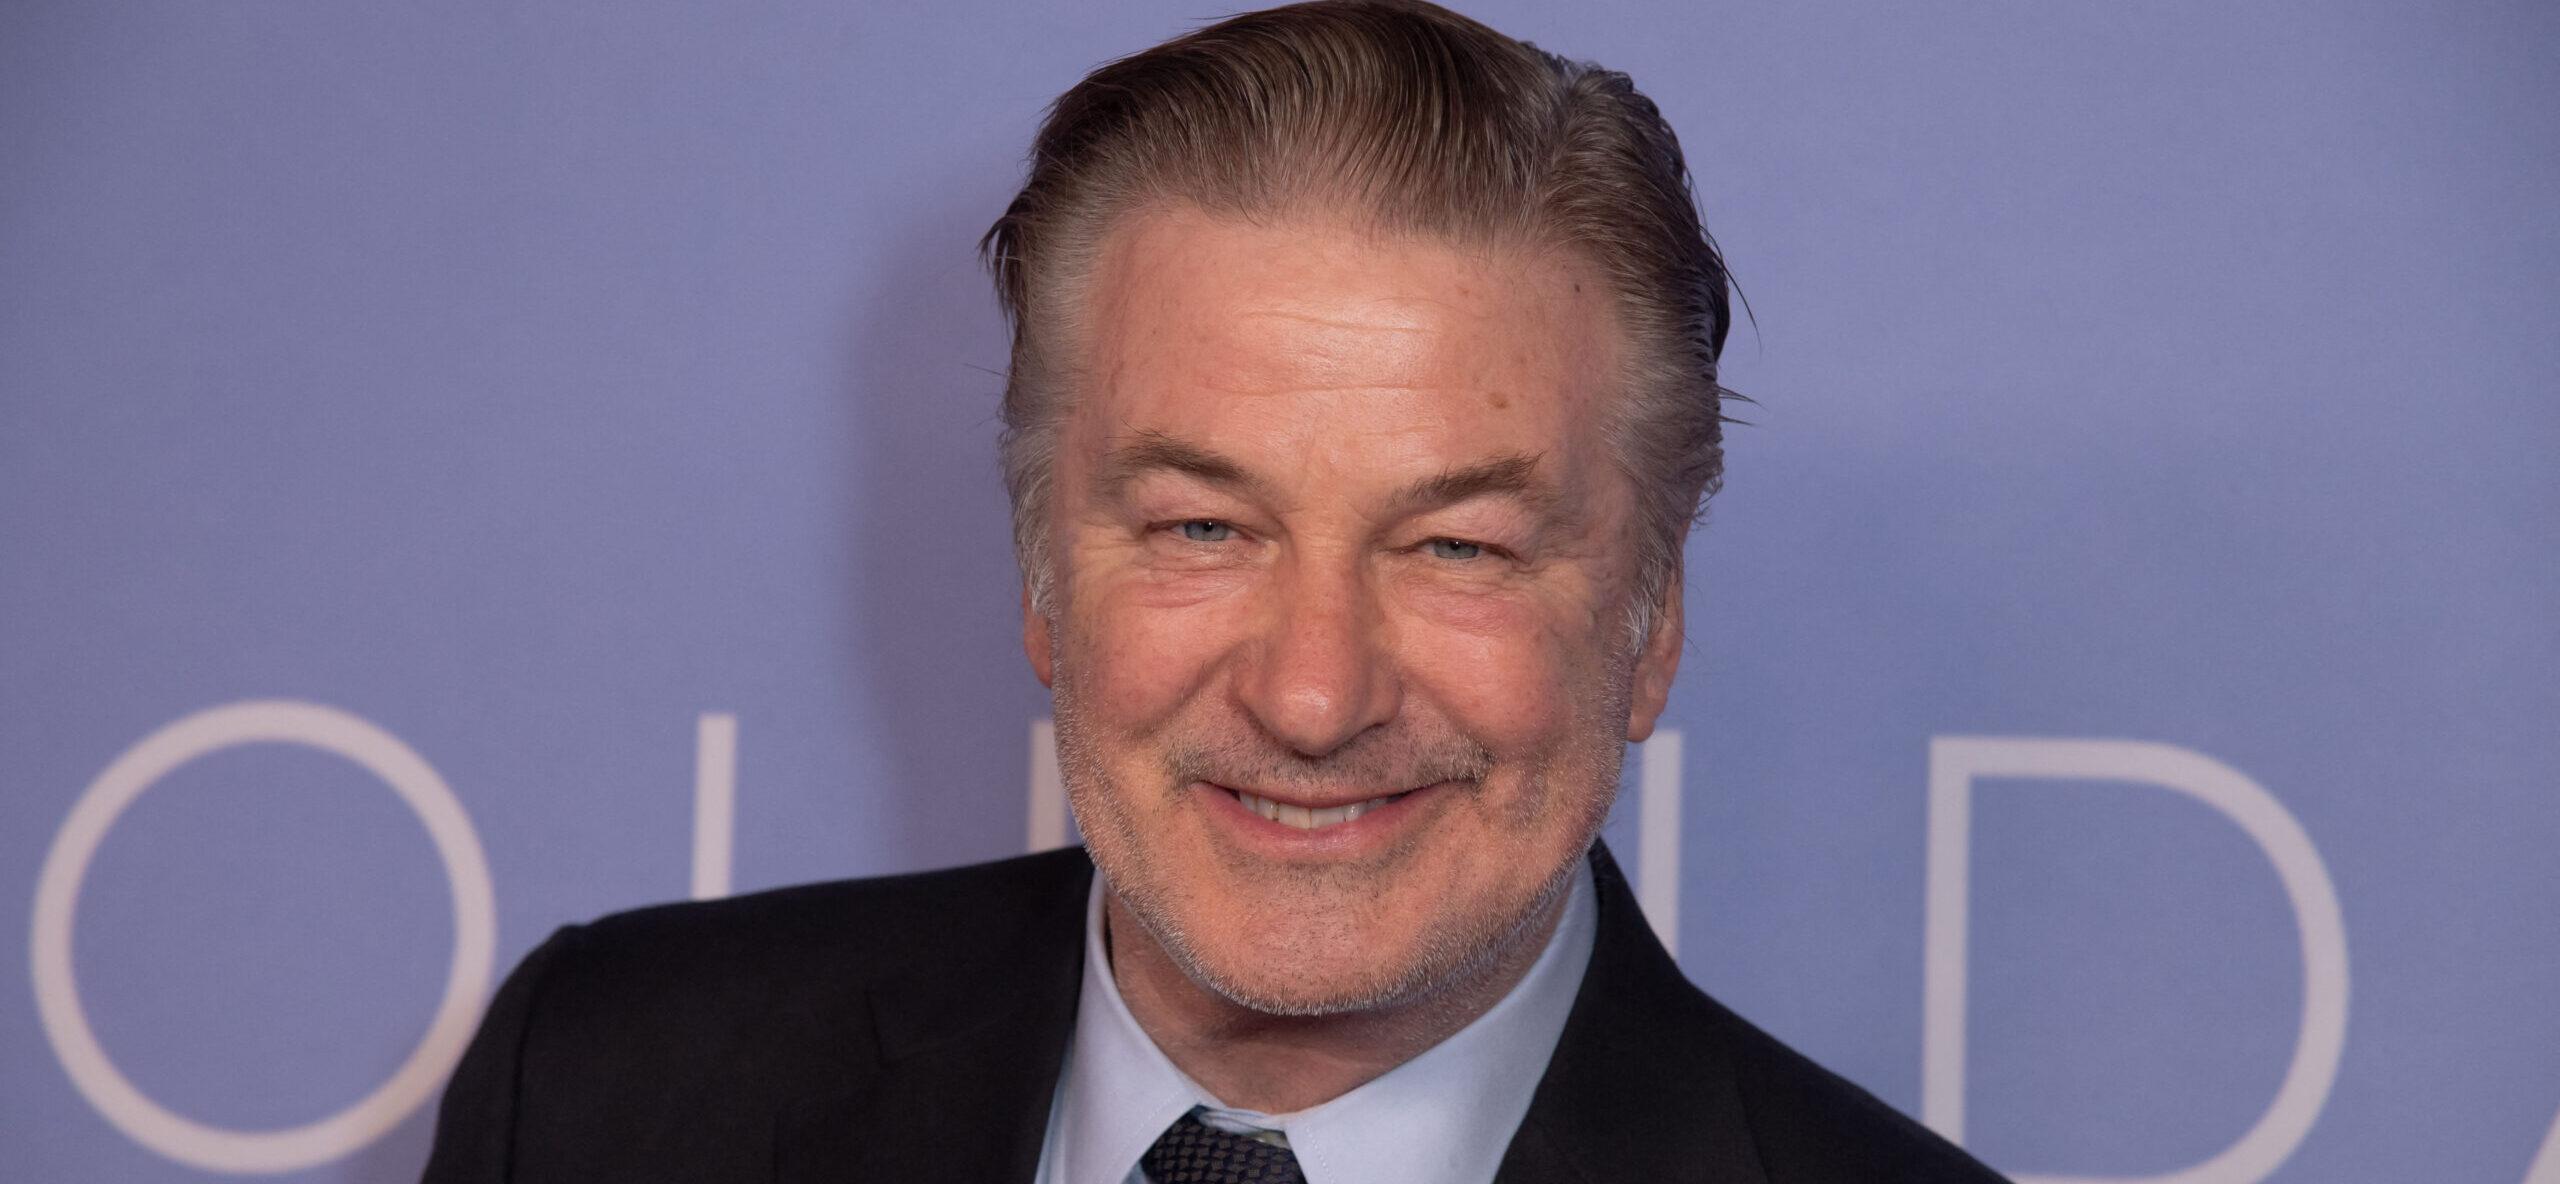 Alec Baldwin Loses Cool At “US Airlines” After Being Stuck In Plane